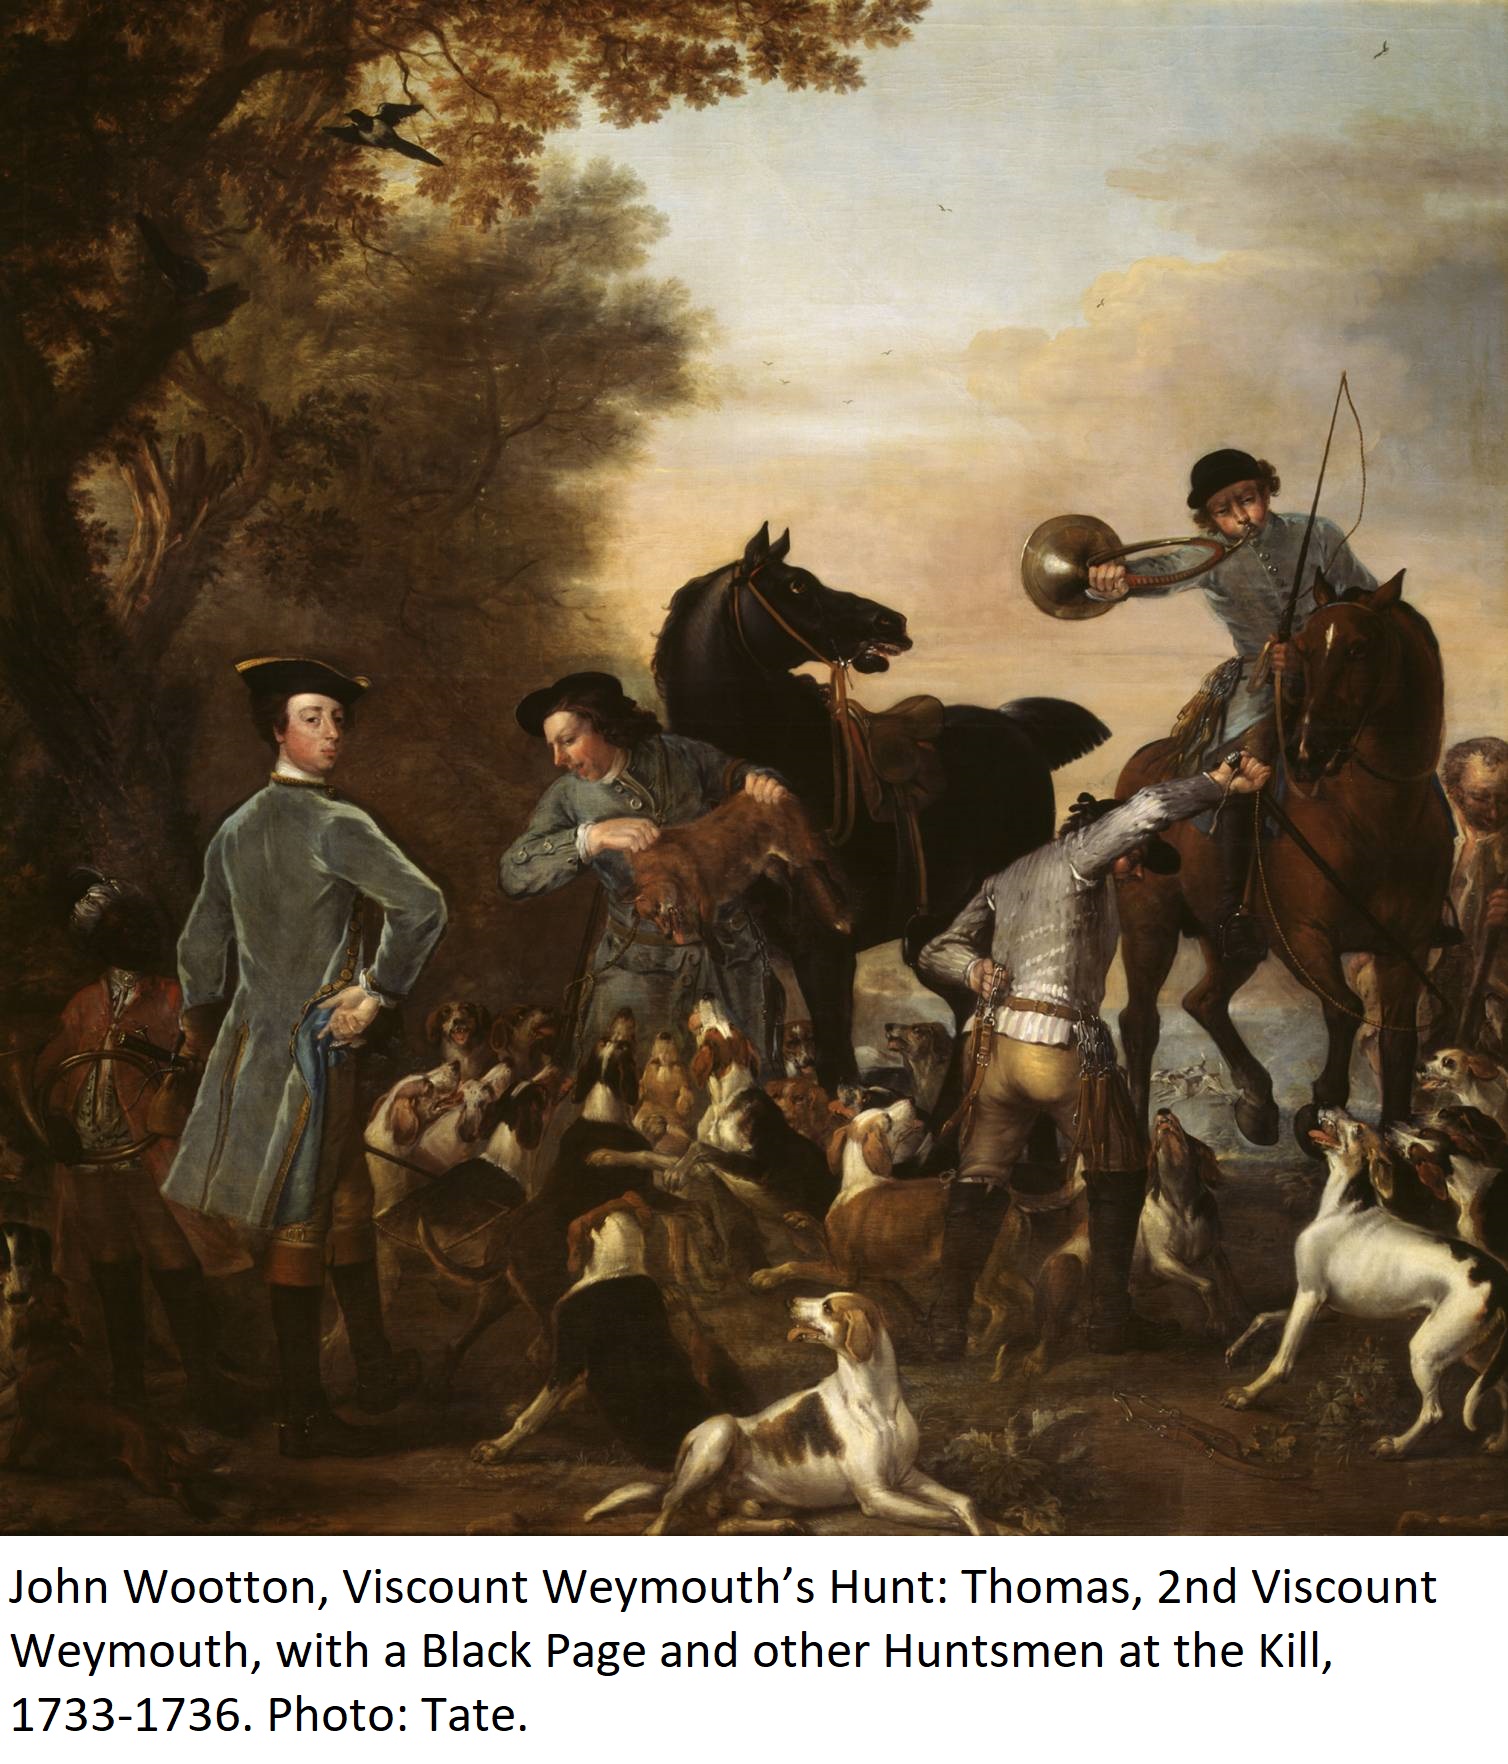 John Wootton, Viscount Weymouth’s Hunt: Thomas, 2nd Viscount Weymouth, with a Black Page and other Huntsmen at the Kill, 1733-1736. Photo: Tate.